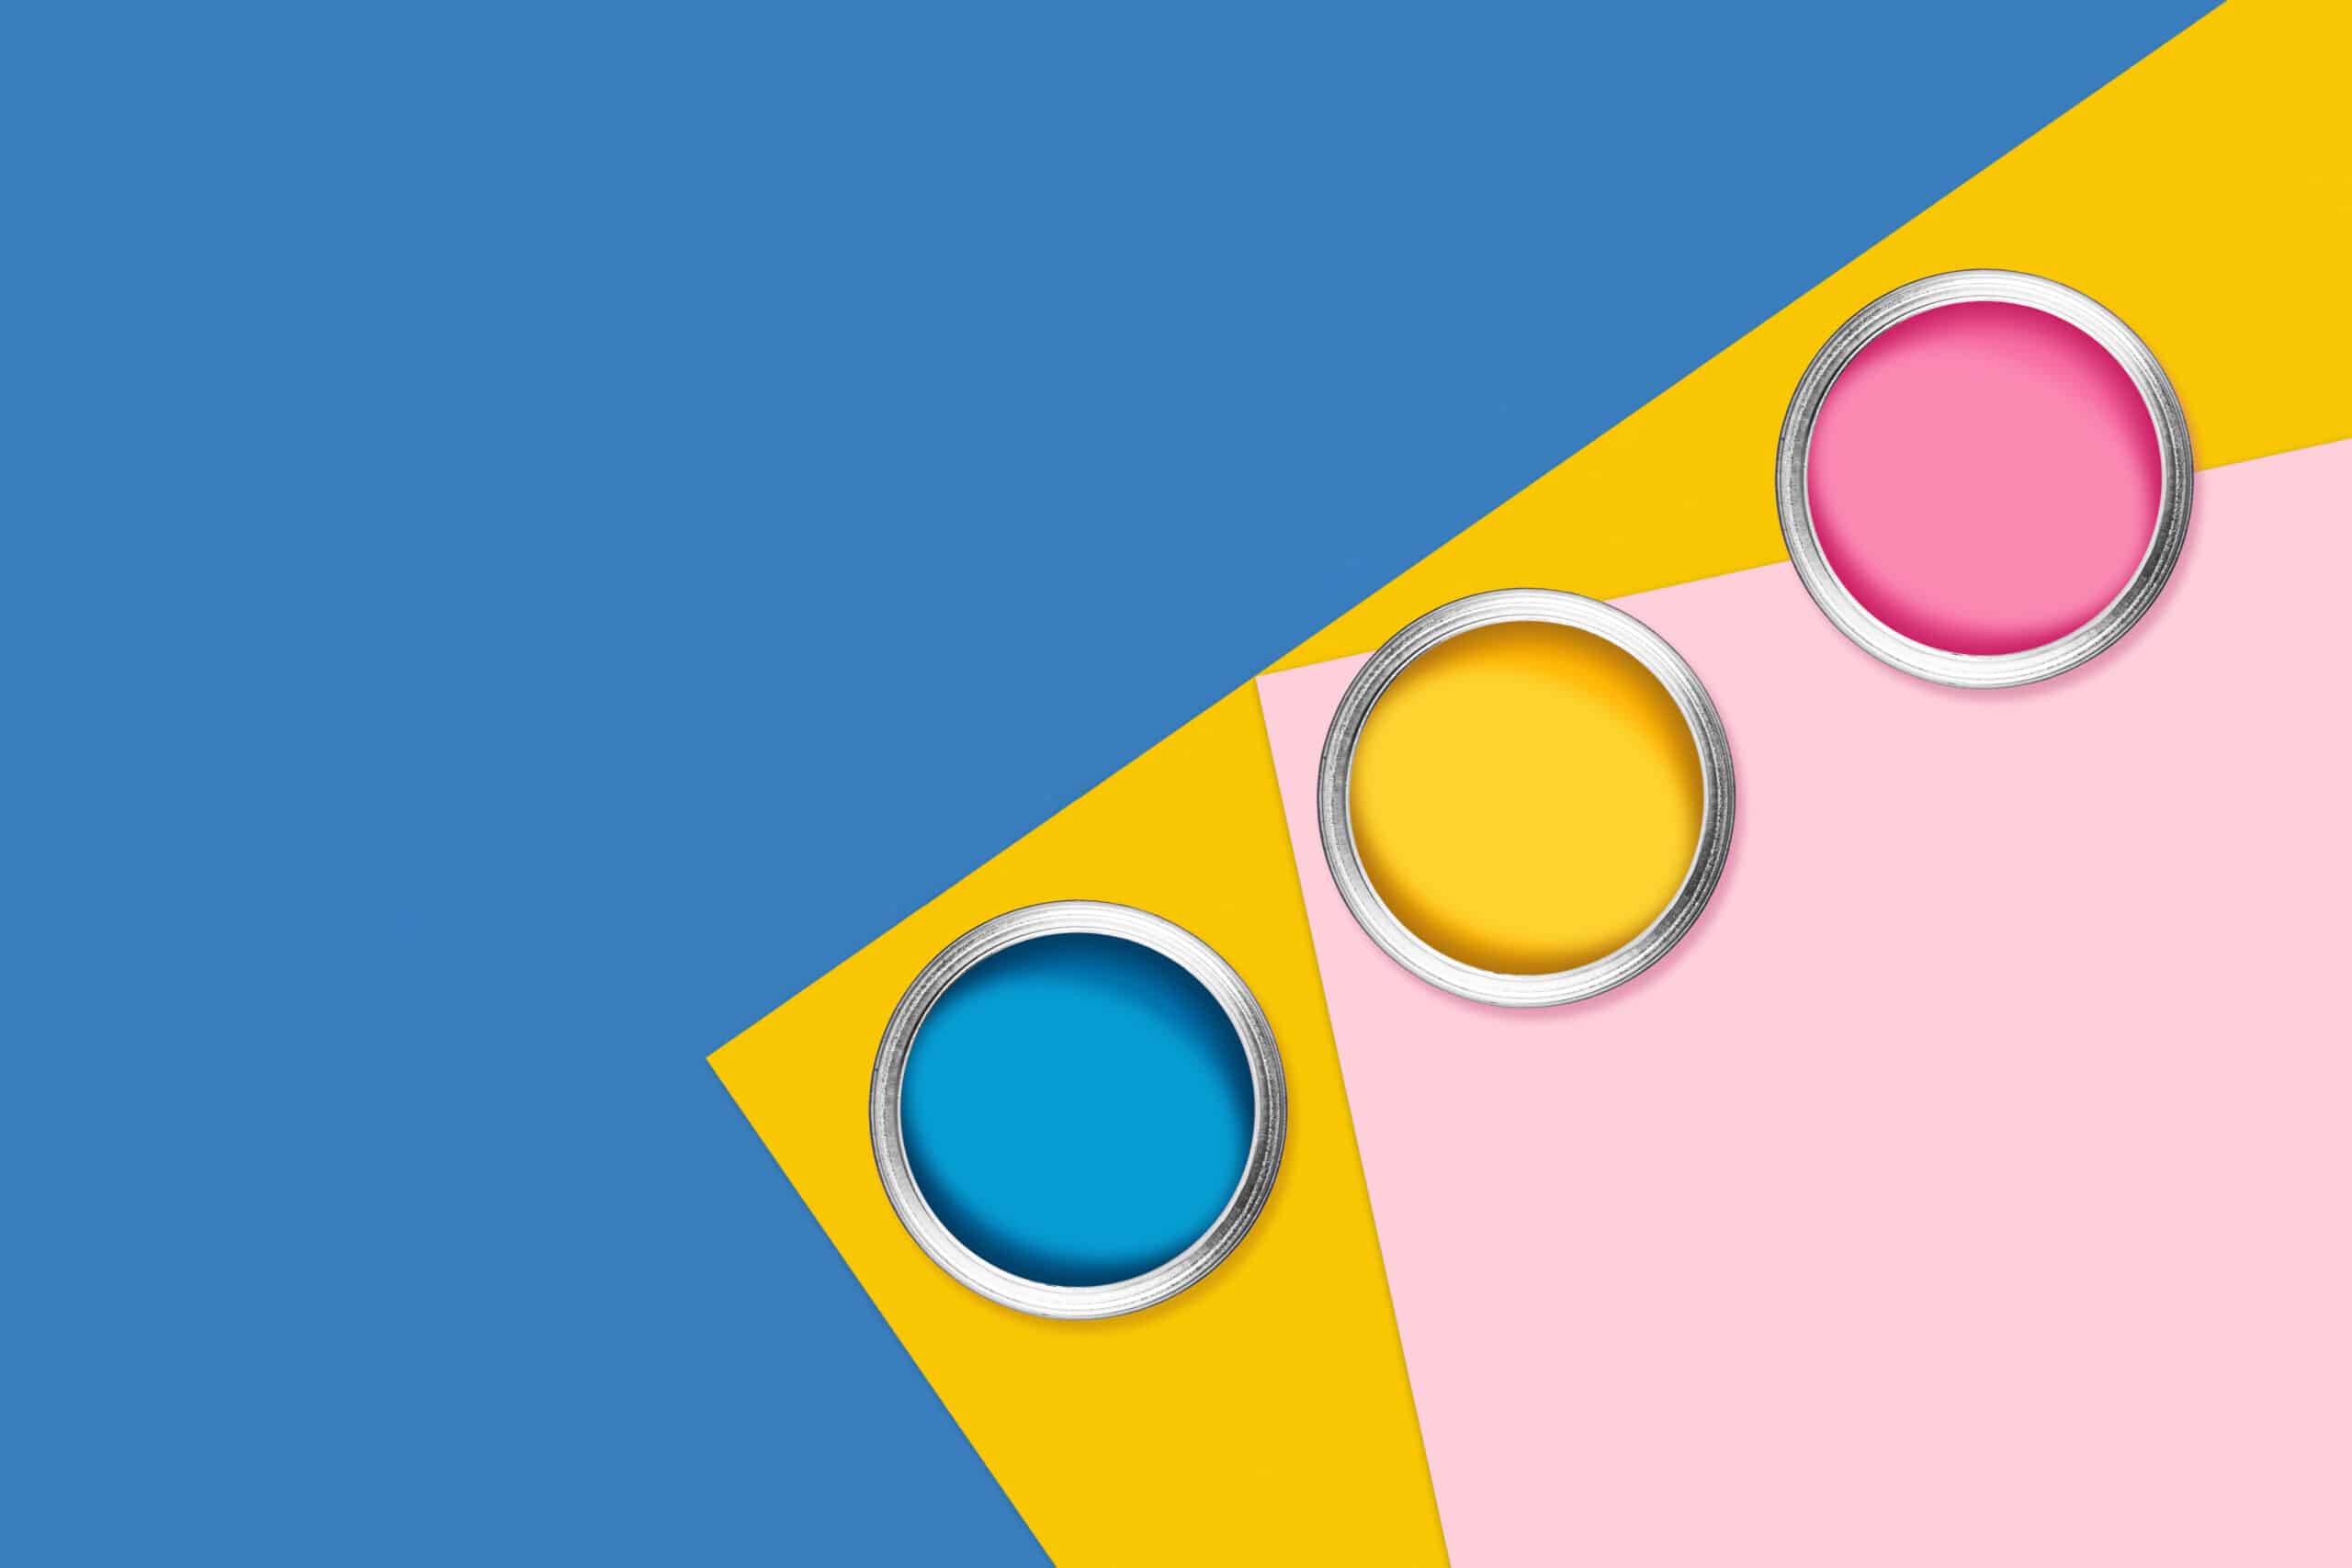 Blue, yellow and pink background with three cans of color paint, diagonal composition. Flat lay, top view, copy space.